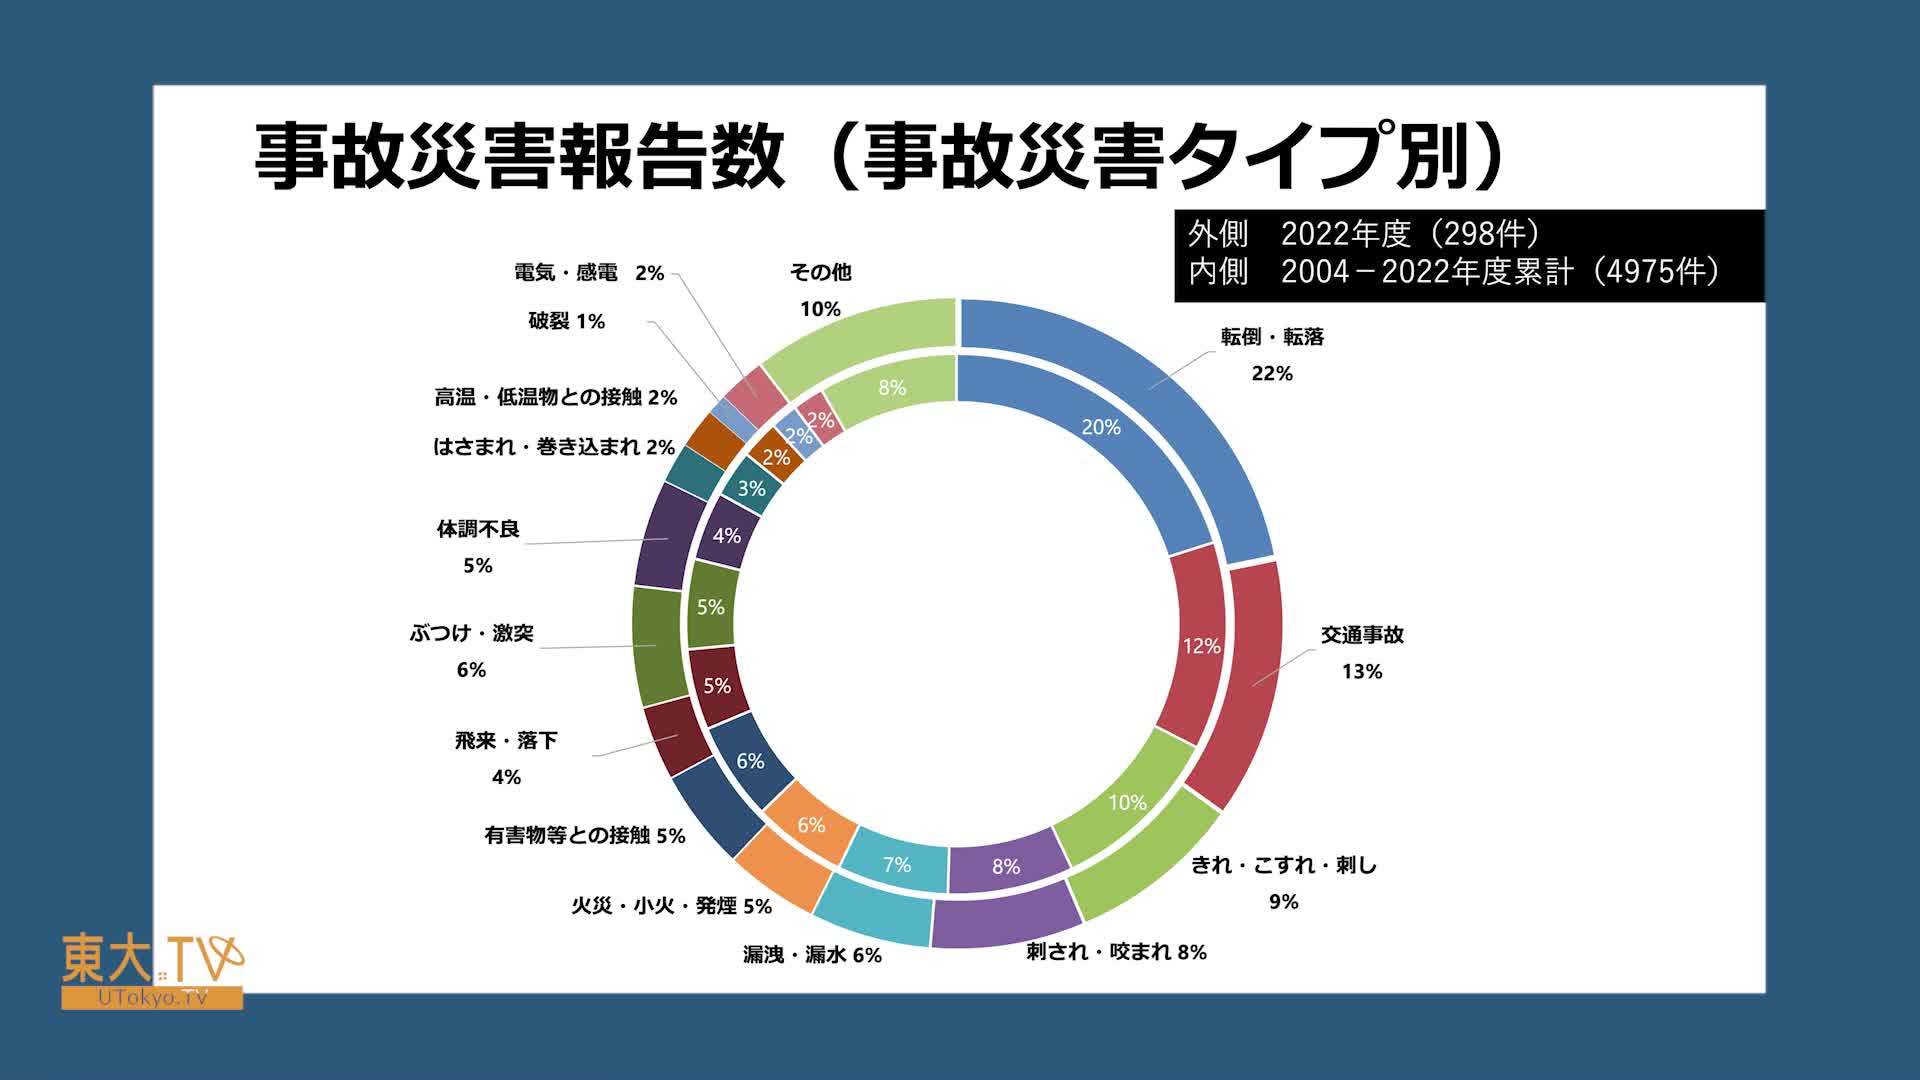 Report on Accidents and Disasters in the 2022 Fiscal Year (Statistics, Case Studies, etc.) [JP]